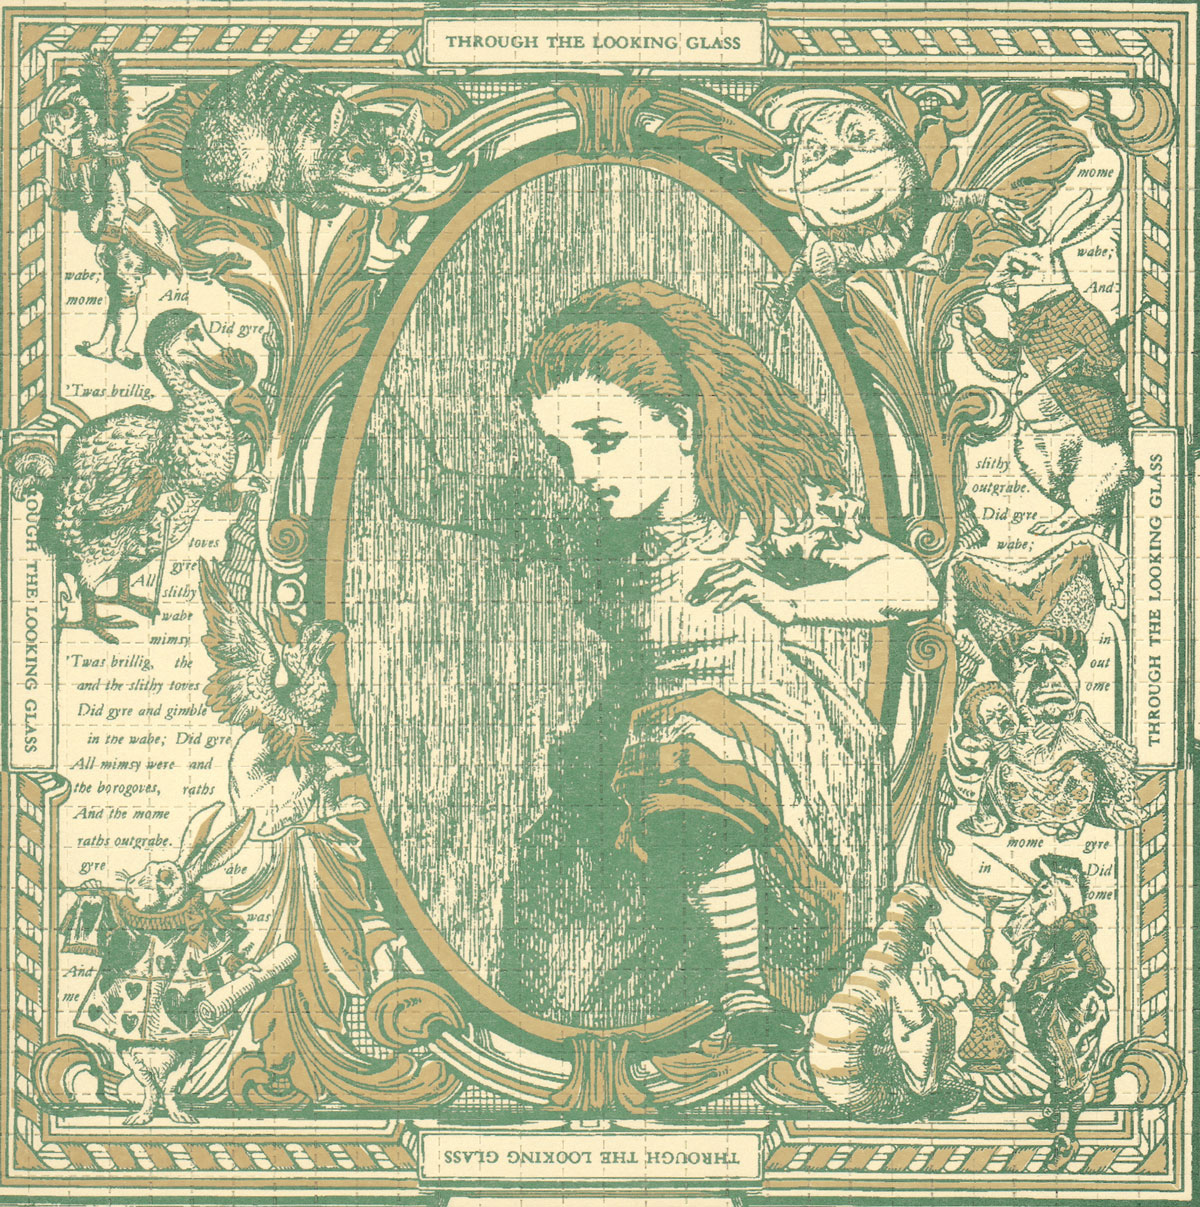 The front of a sheet of blotter acid paper featuring a design including characters and text from Lewis Carroll's 